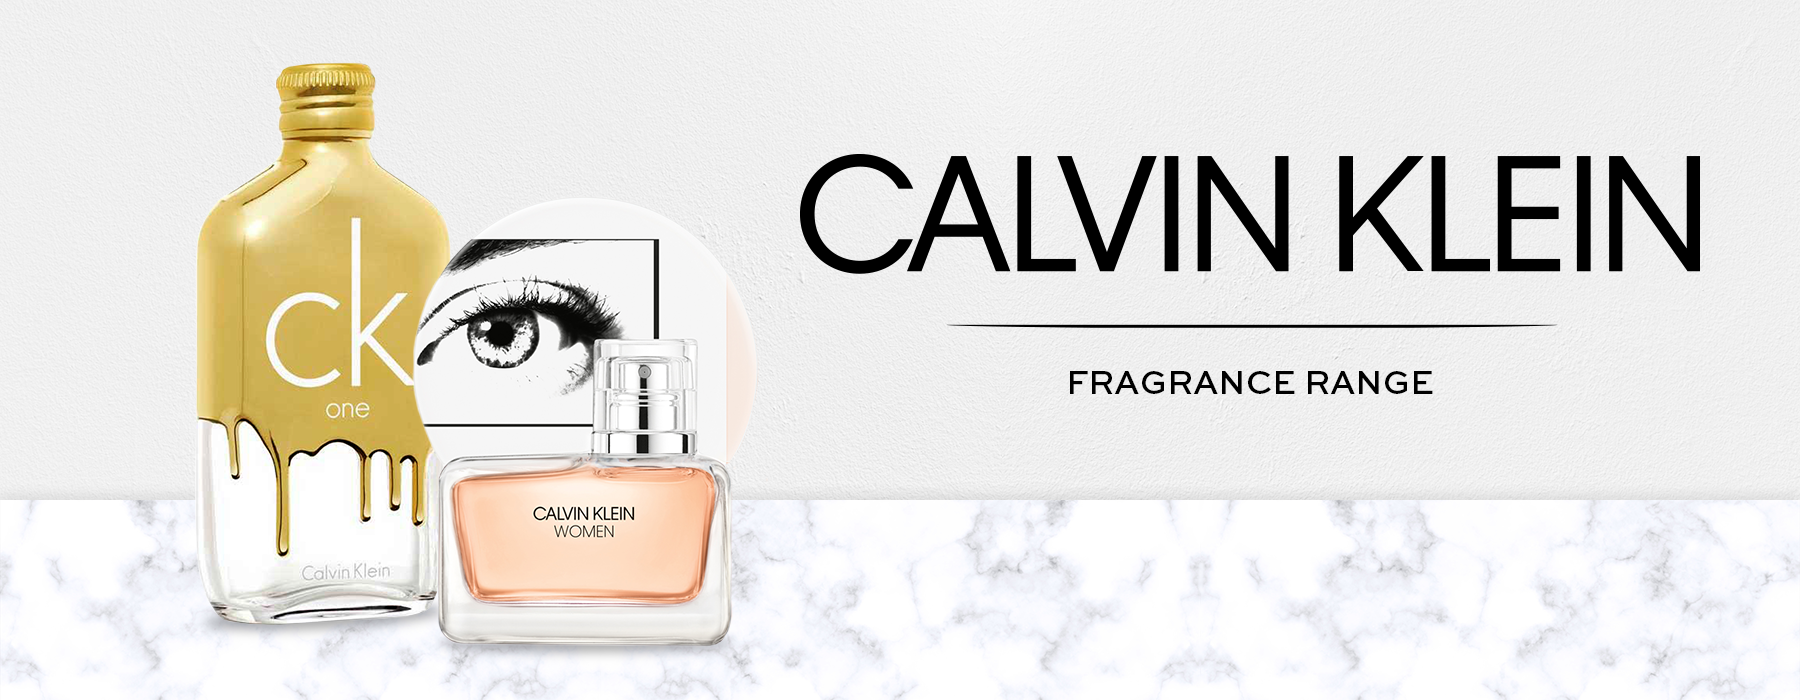 Calvin Klein and CK Fragrances and Cologne - Cosmetics Fragrance Direct